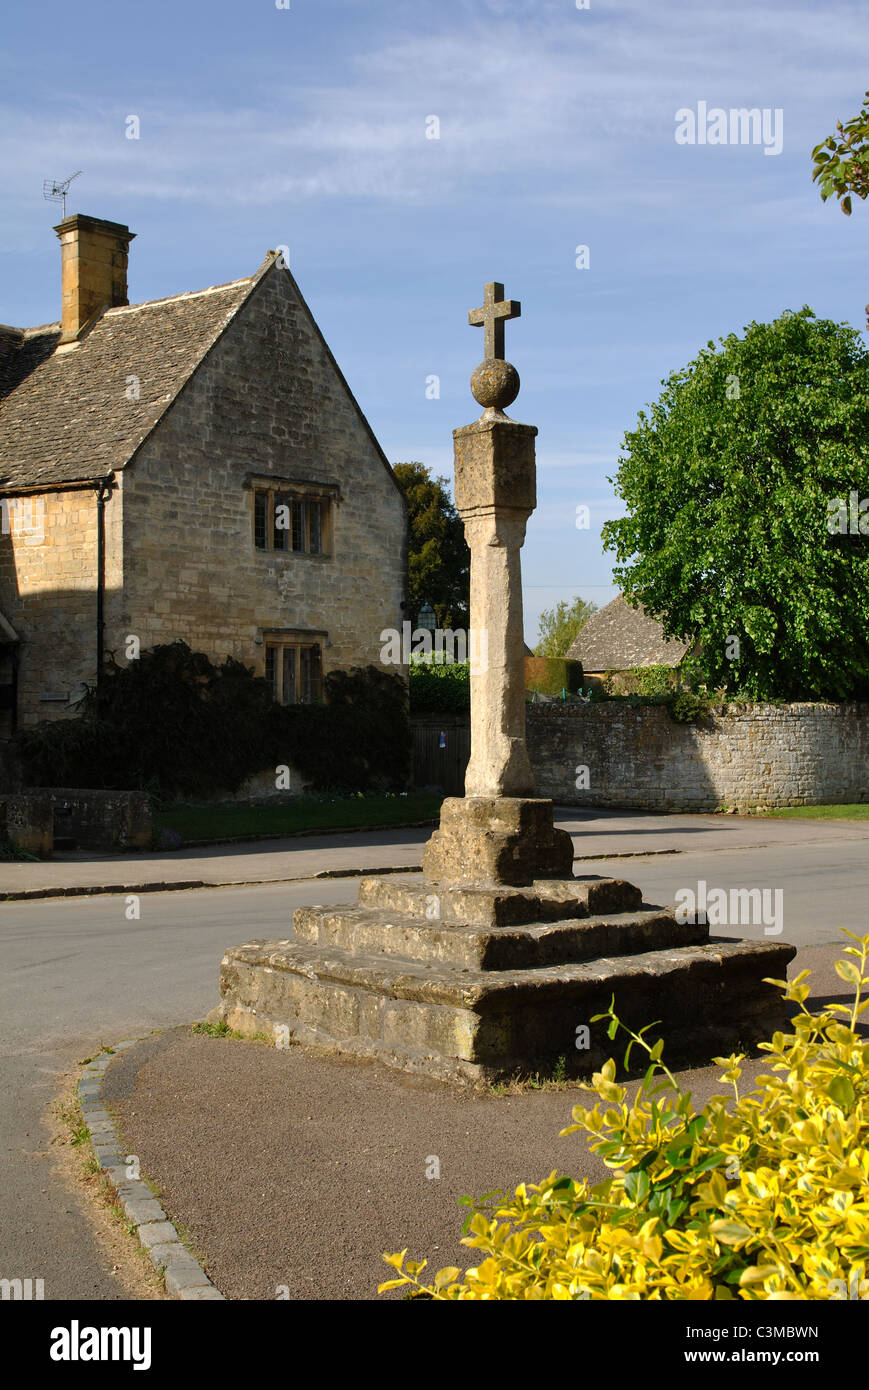 The old cross in Stanton village, Gloucestershire, England, UK Stock Photo